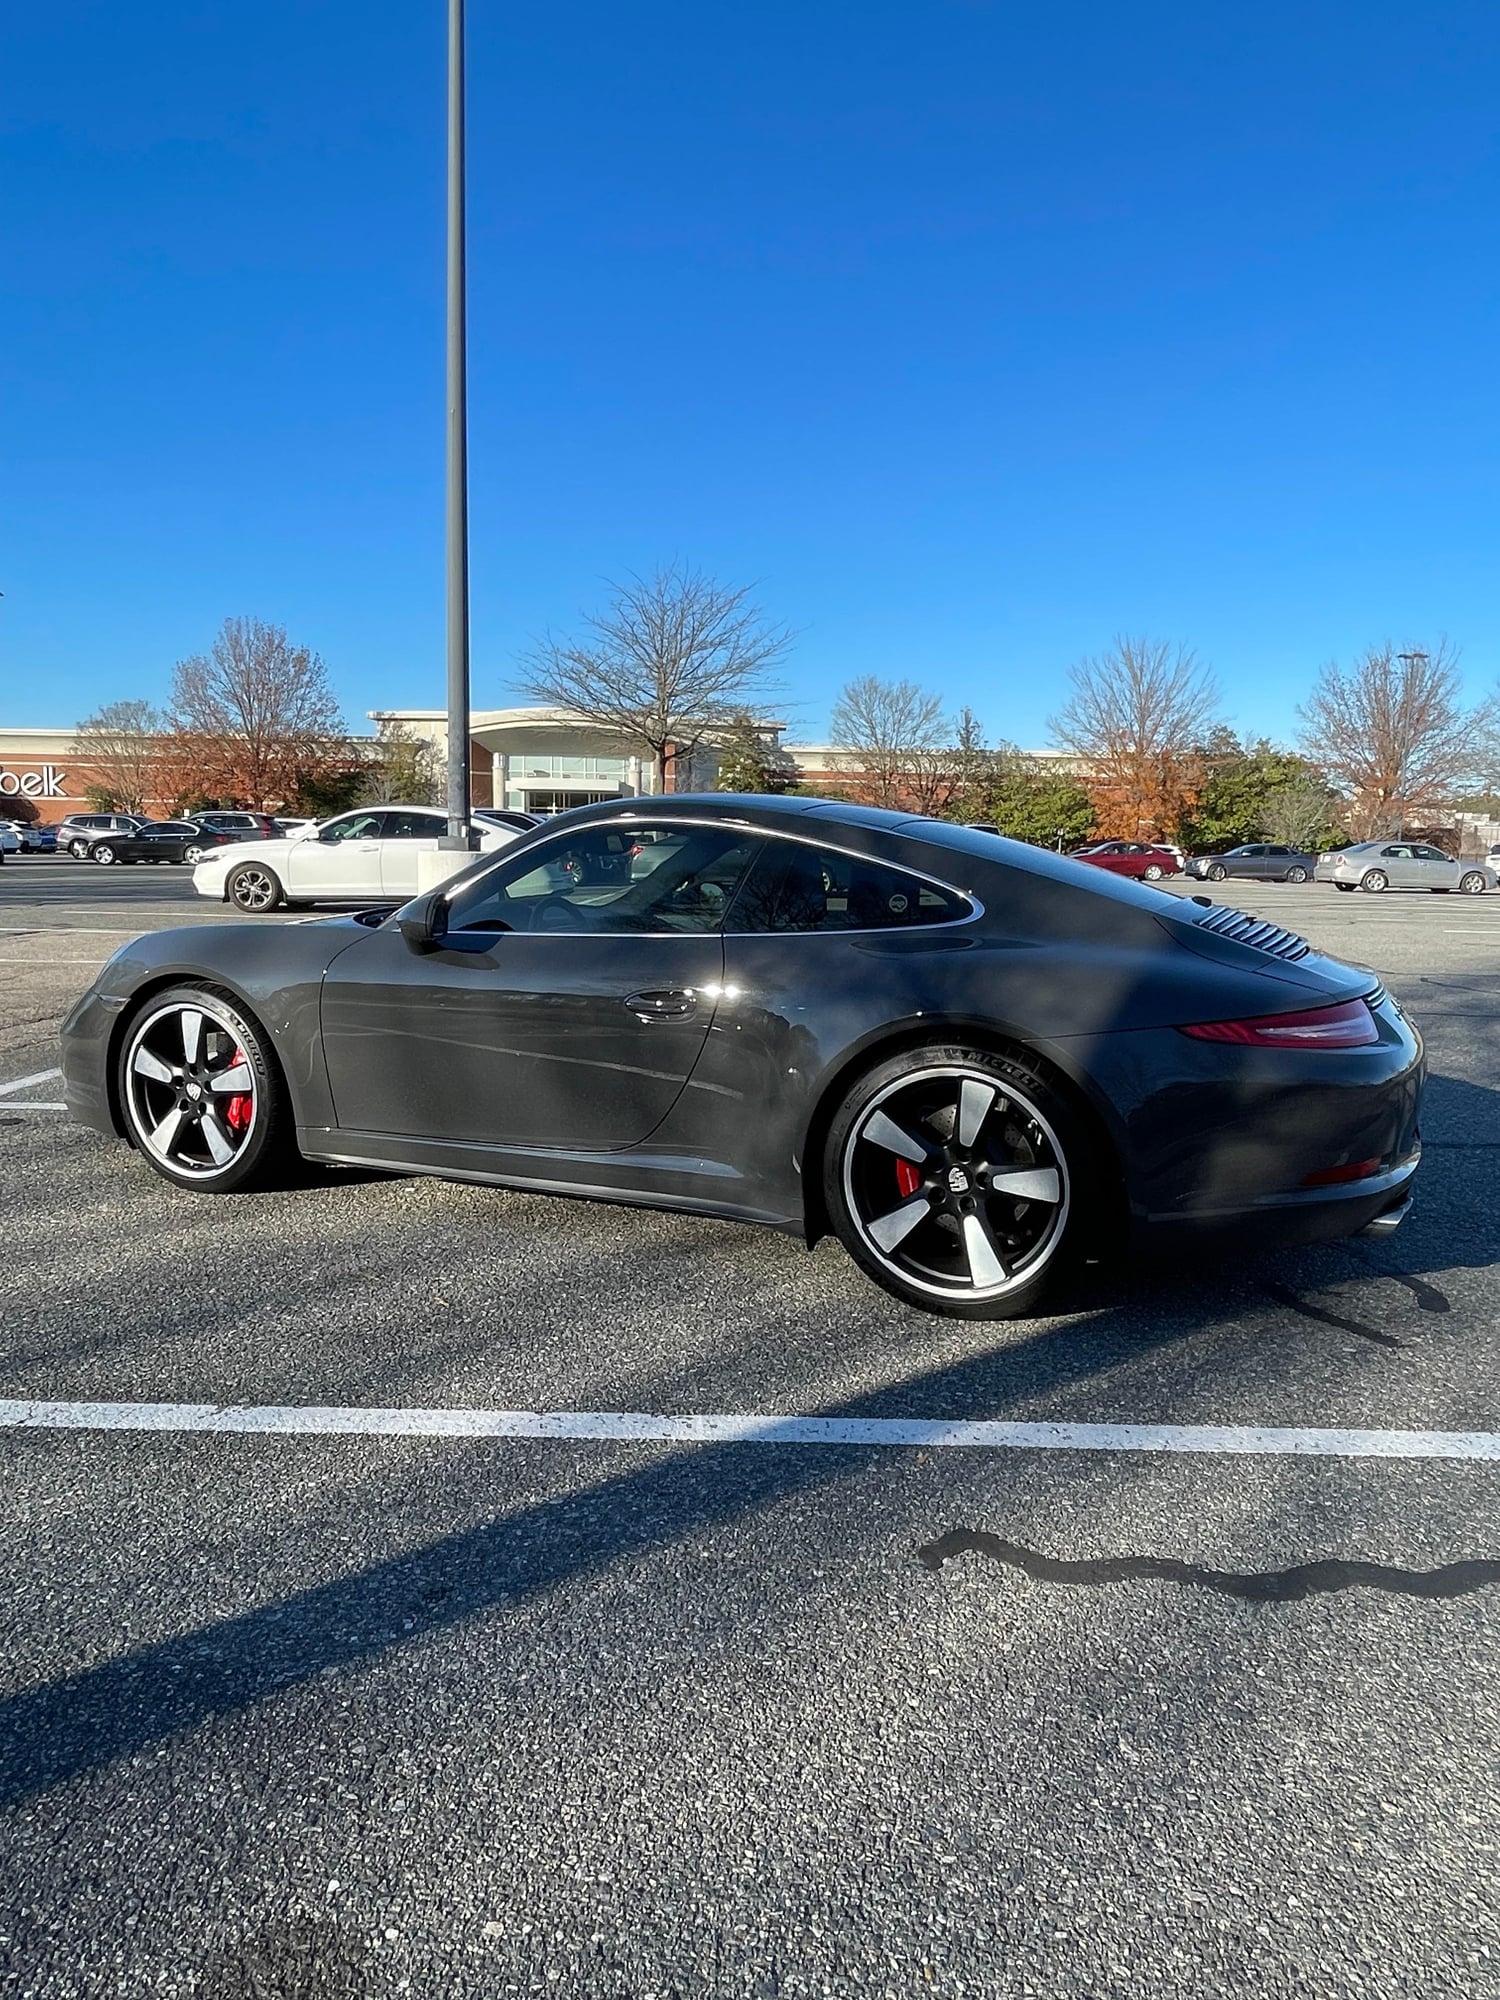 2014 Porsche 911 - My beautiful 911 50th Anniversary - Used - VIN WP0AB2A9XES121346 - 6 cyl - 2WD - Automatic - Coupe - Gray - New Hill, NC 27562, United States